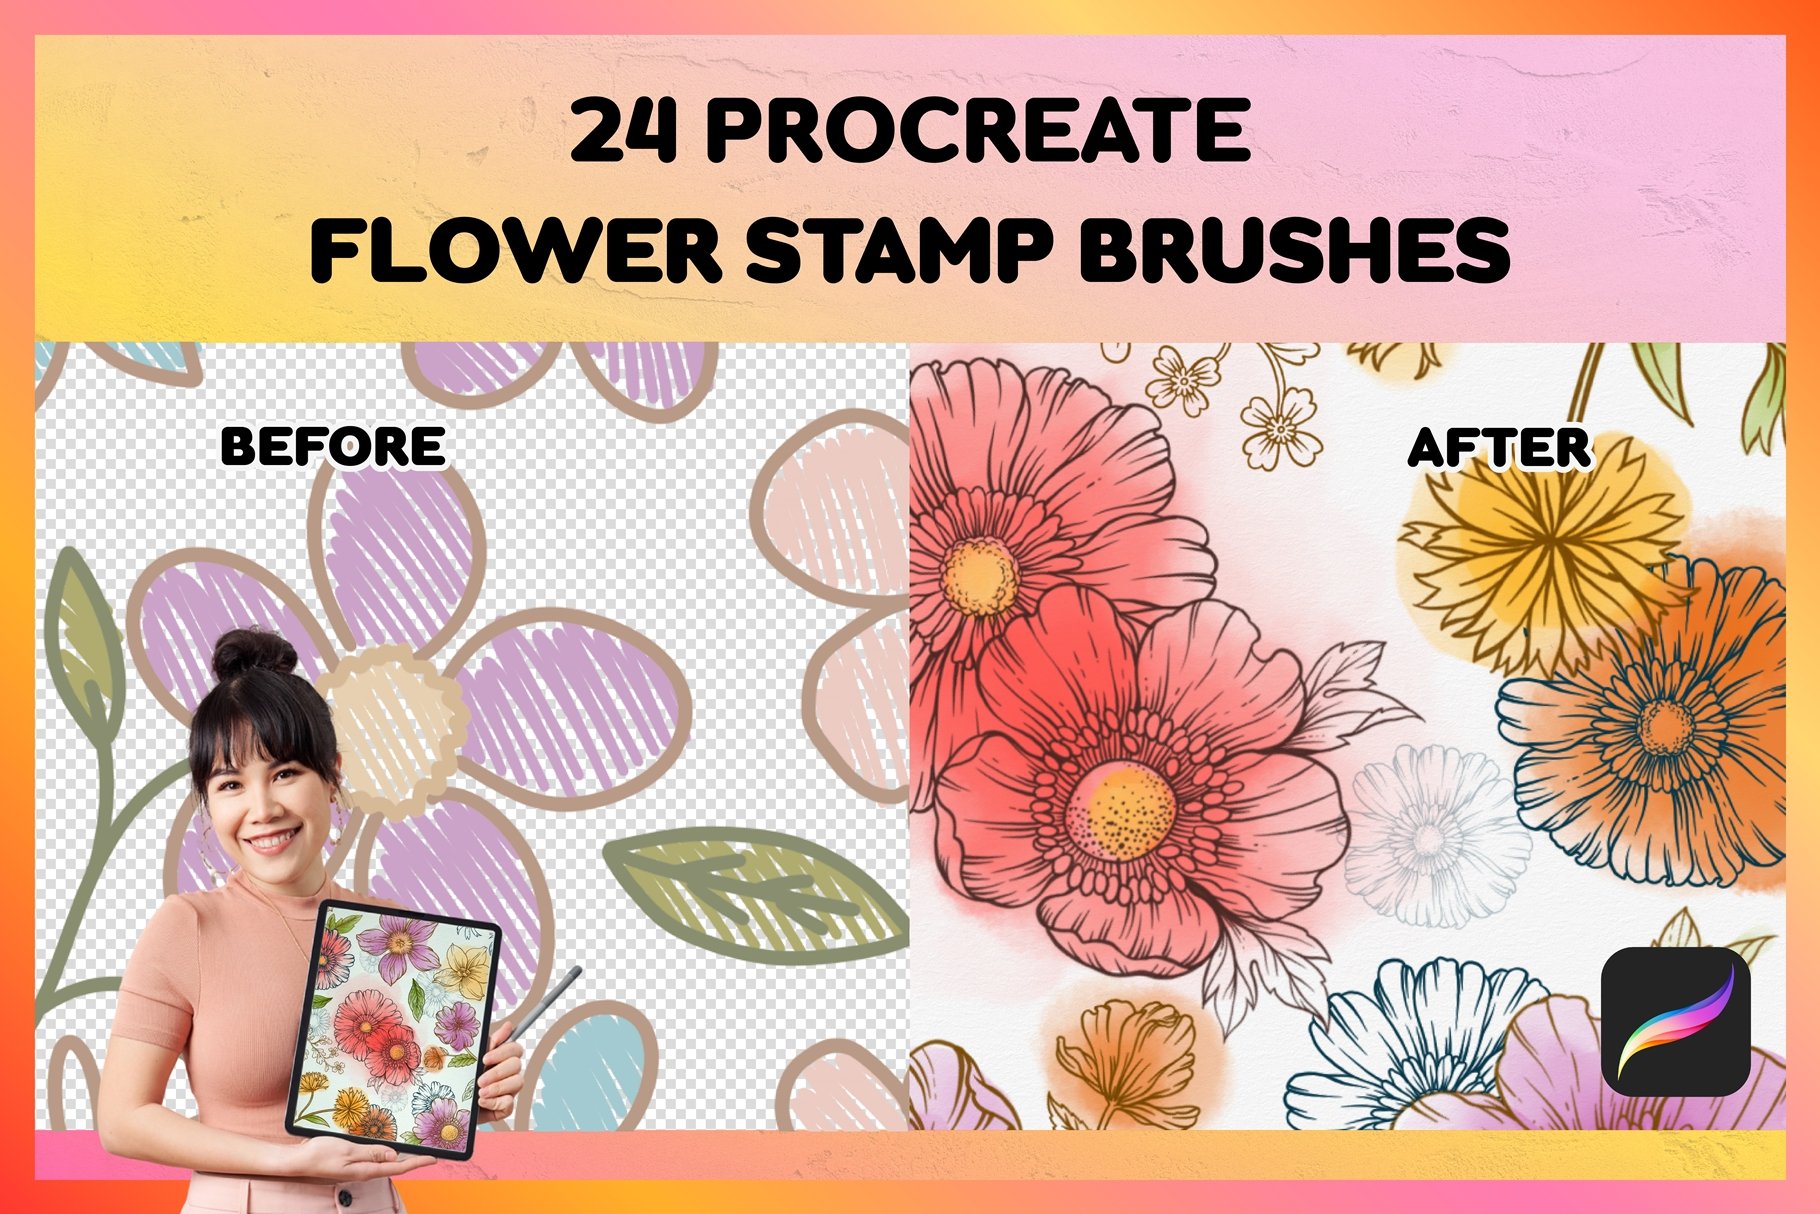 Procreate Flower Brushes  5 Small Flower Stamp Brushes - Design Cuts